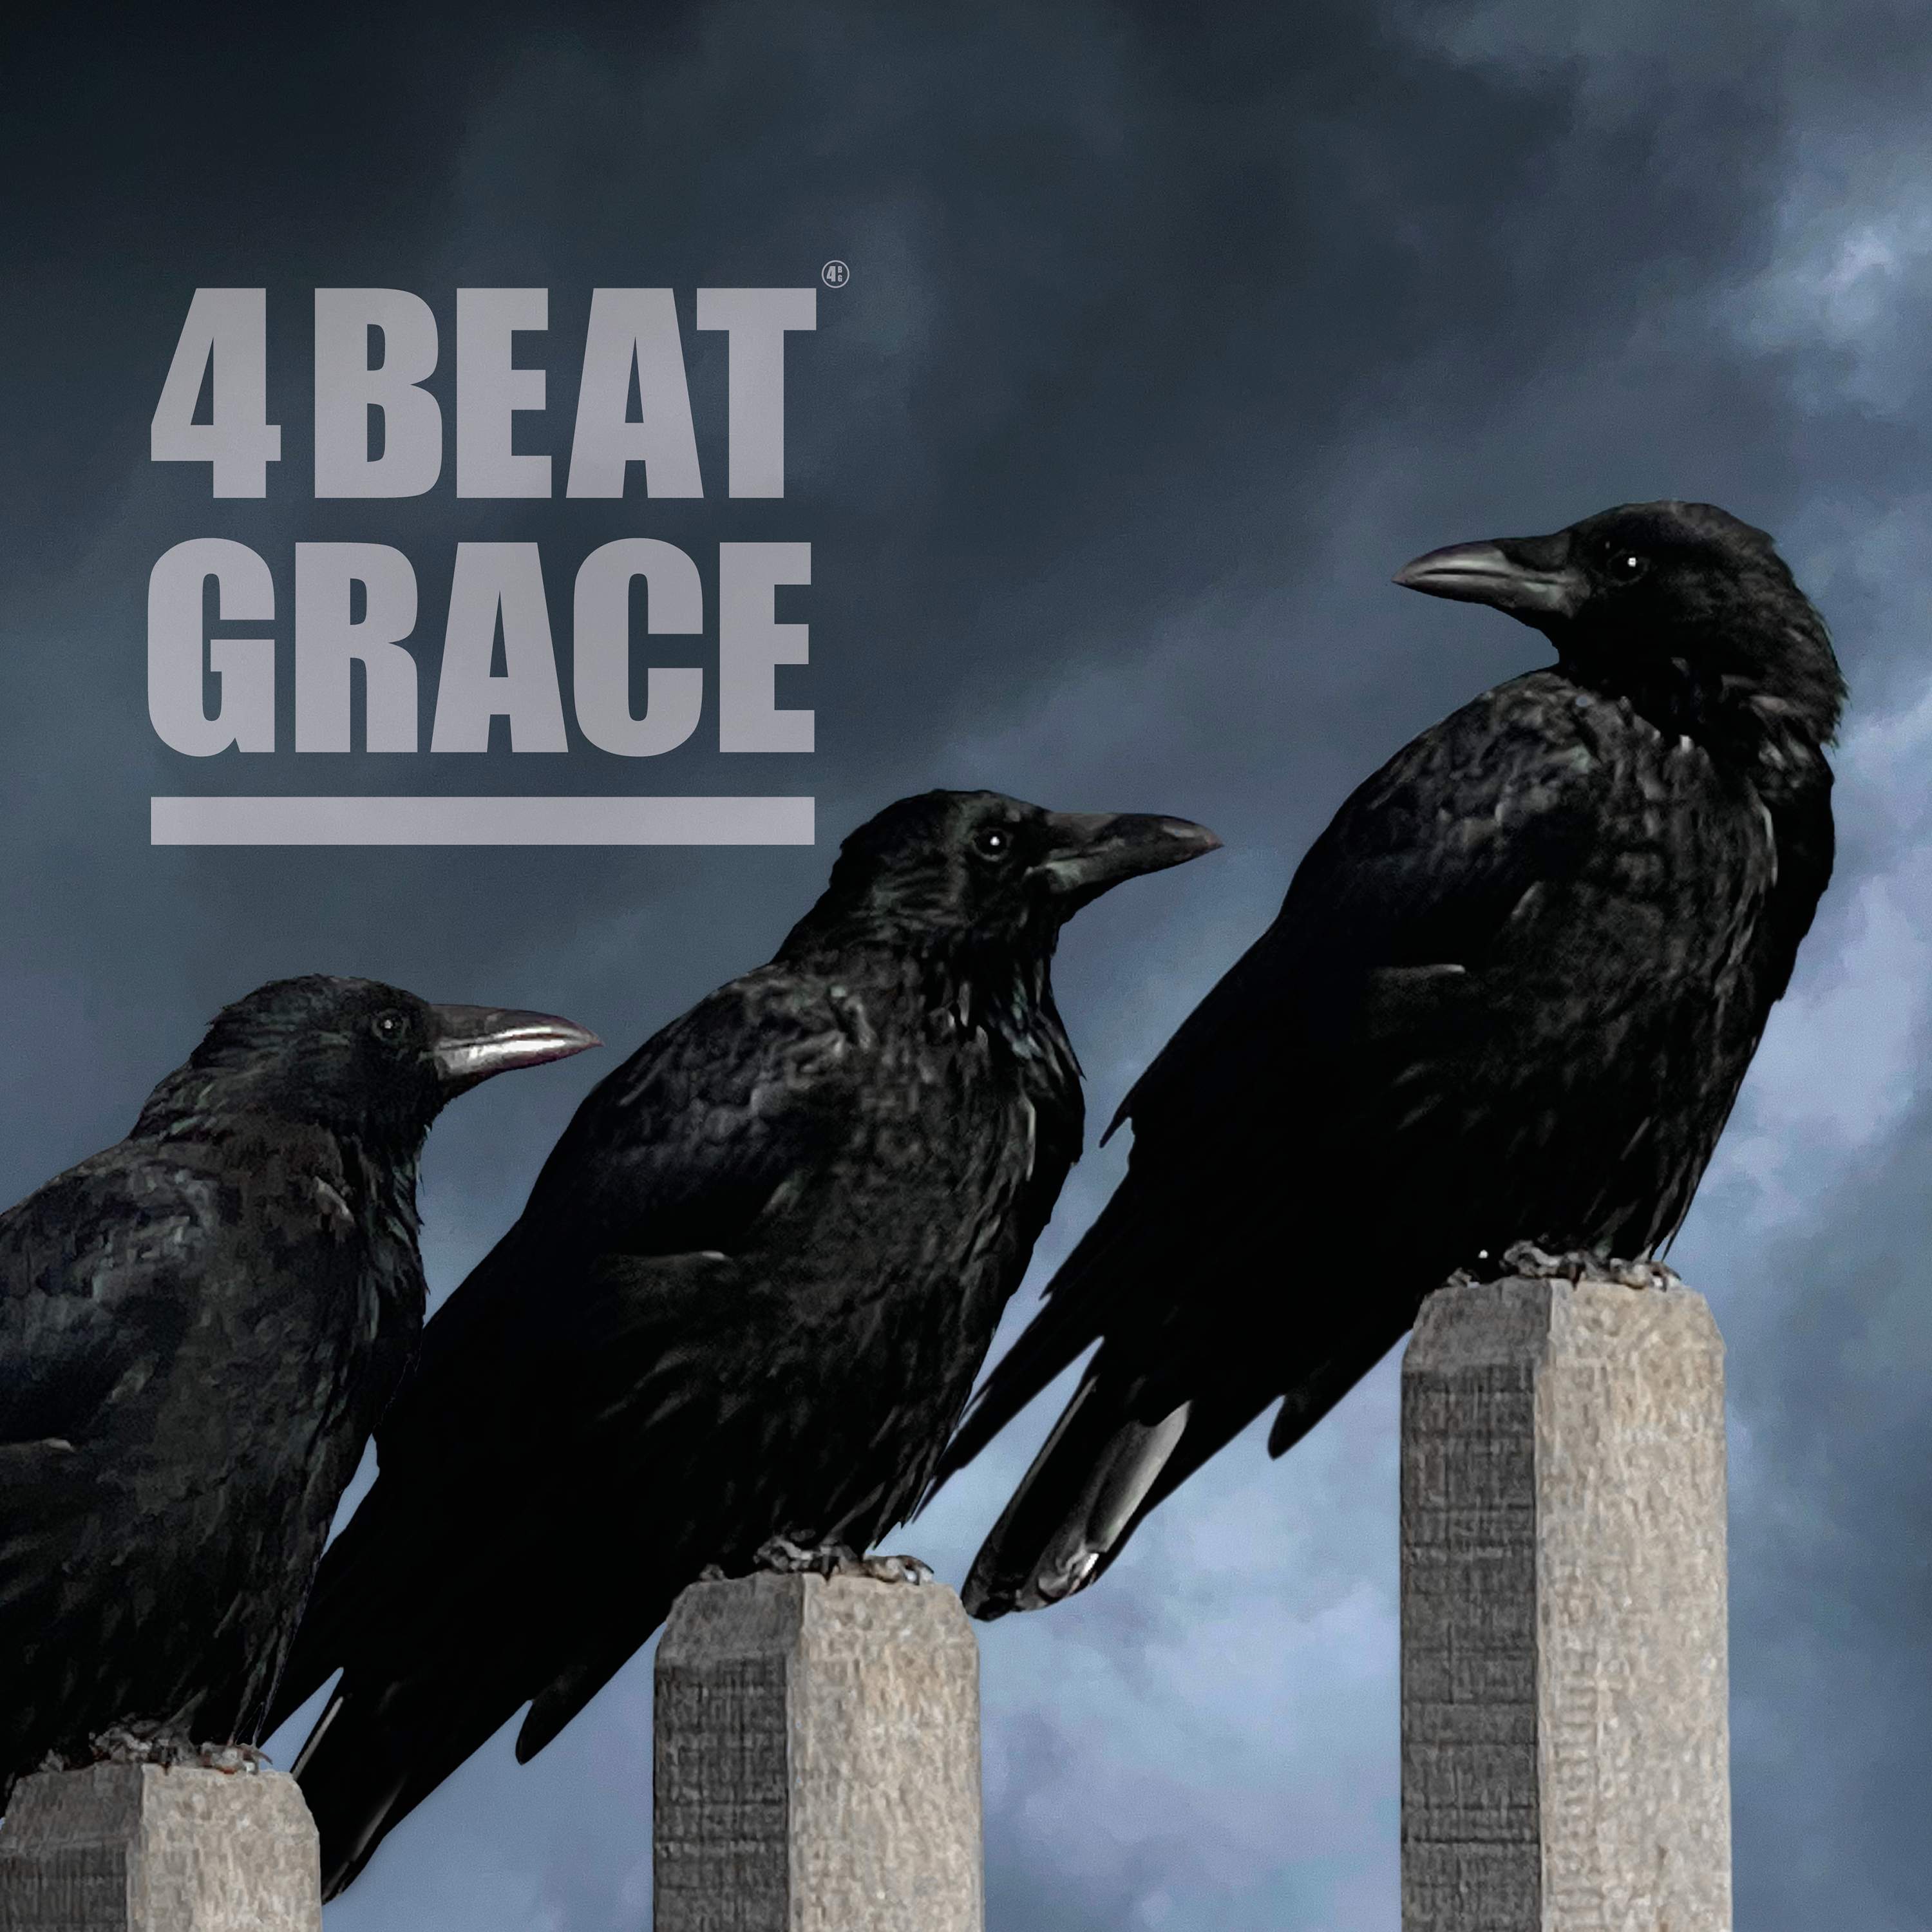 4 Beat Grace self-titled Debut EP